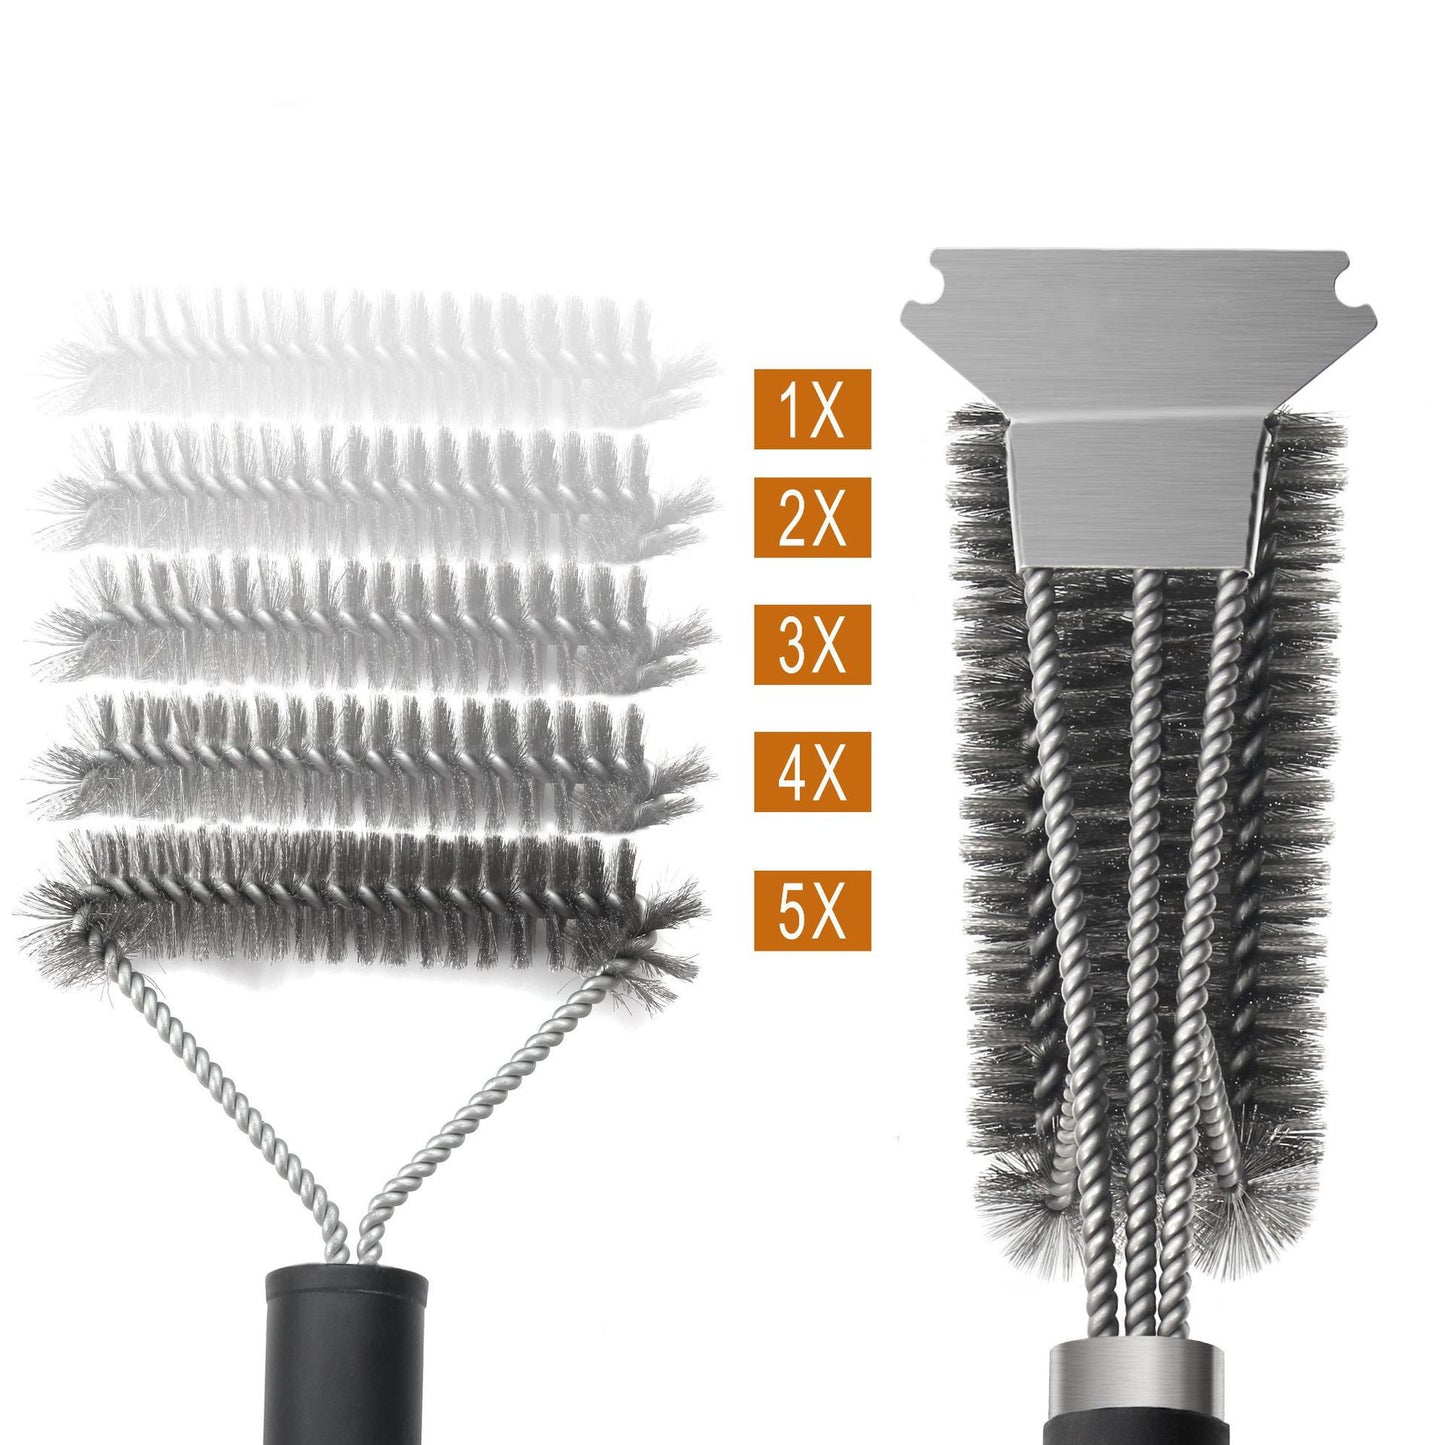 Advanced Grill Brush - Three-headed Oven Grill Cleaning Brush